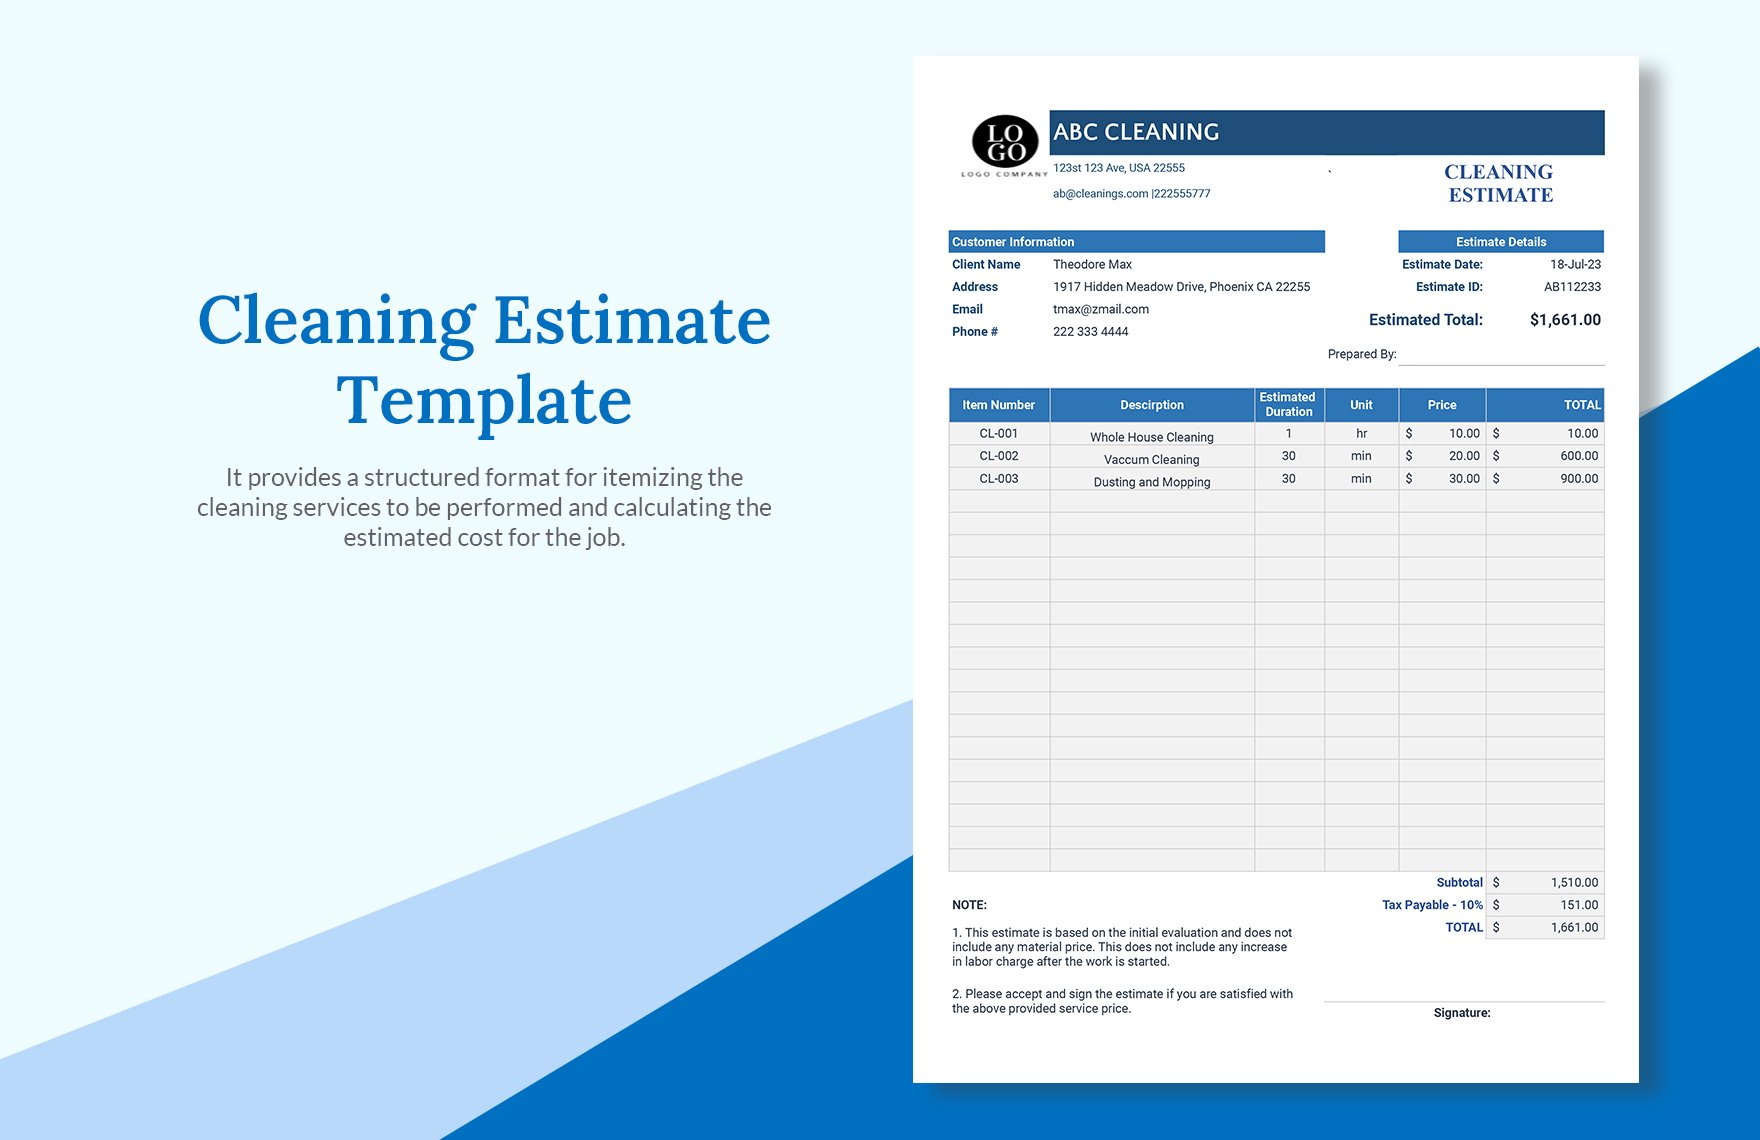 Cleaning Estimate Template Download in Excel, Google Sheets, Adobe XD